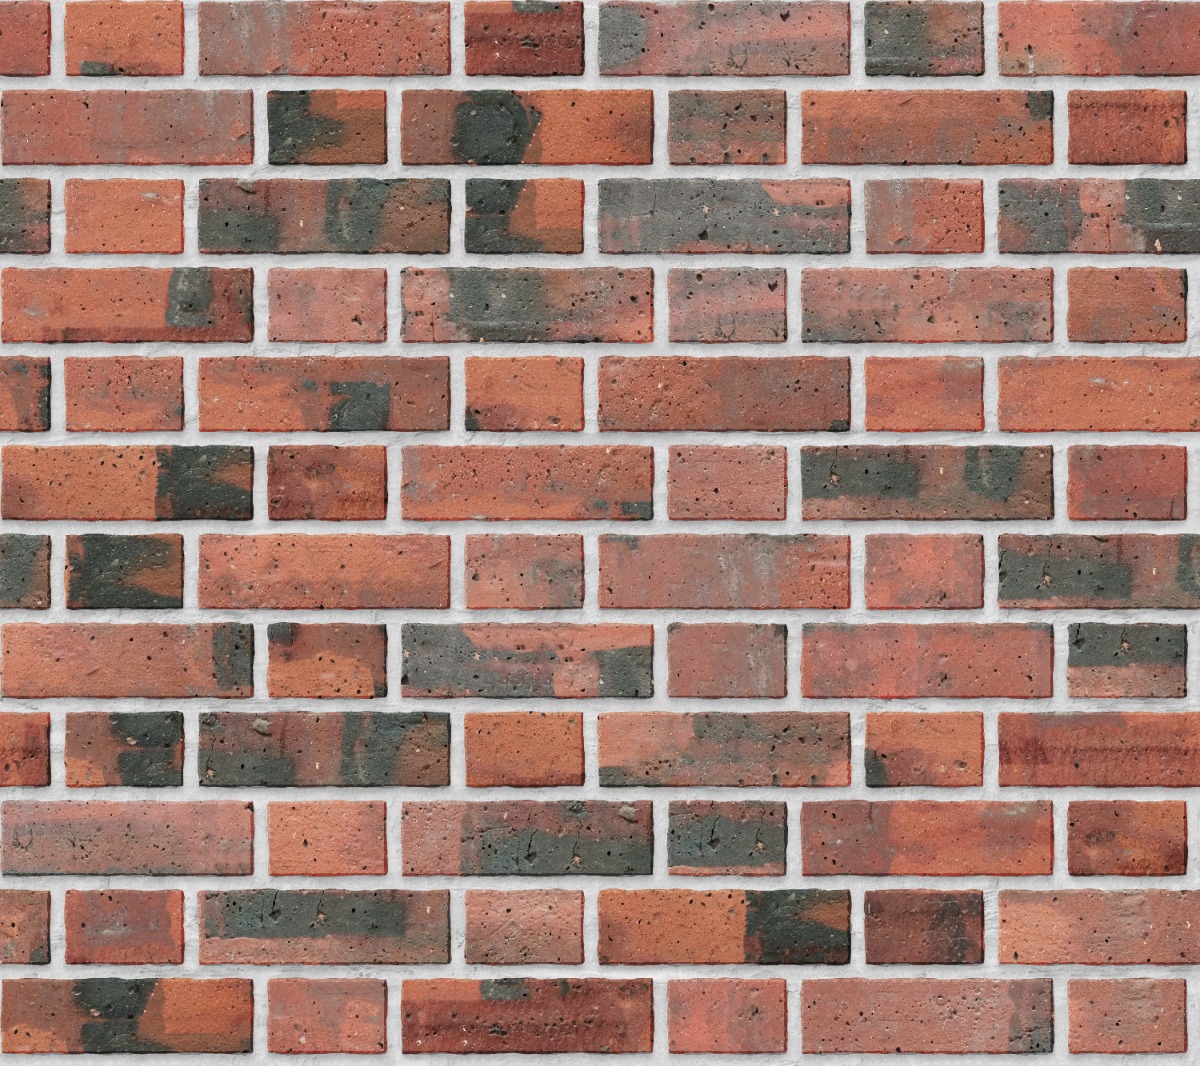 A seamless brick texture with industrial brick units arranged in a Flemish pattern